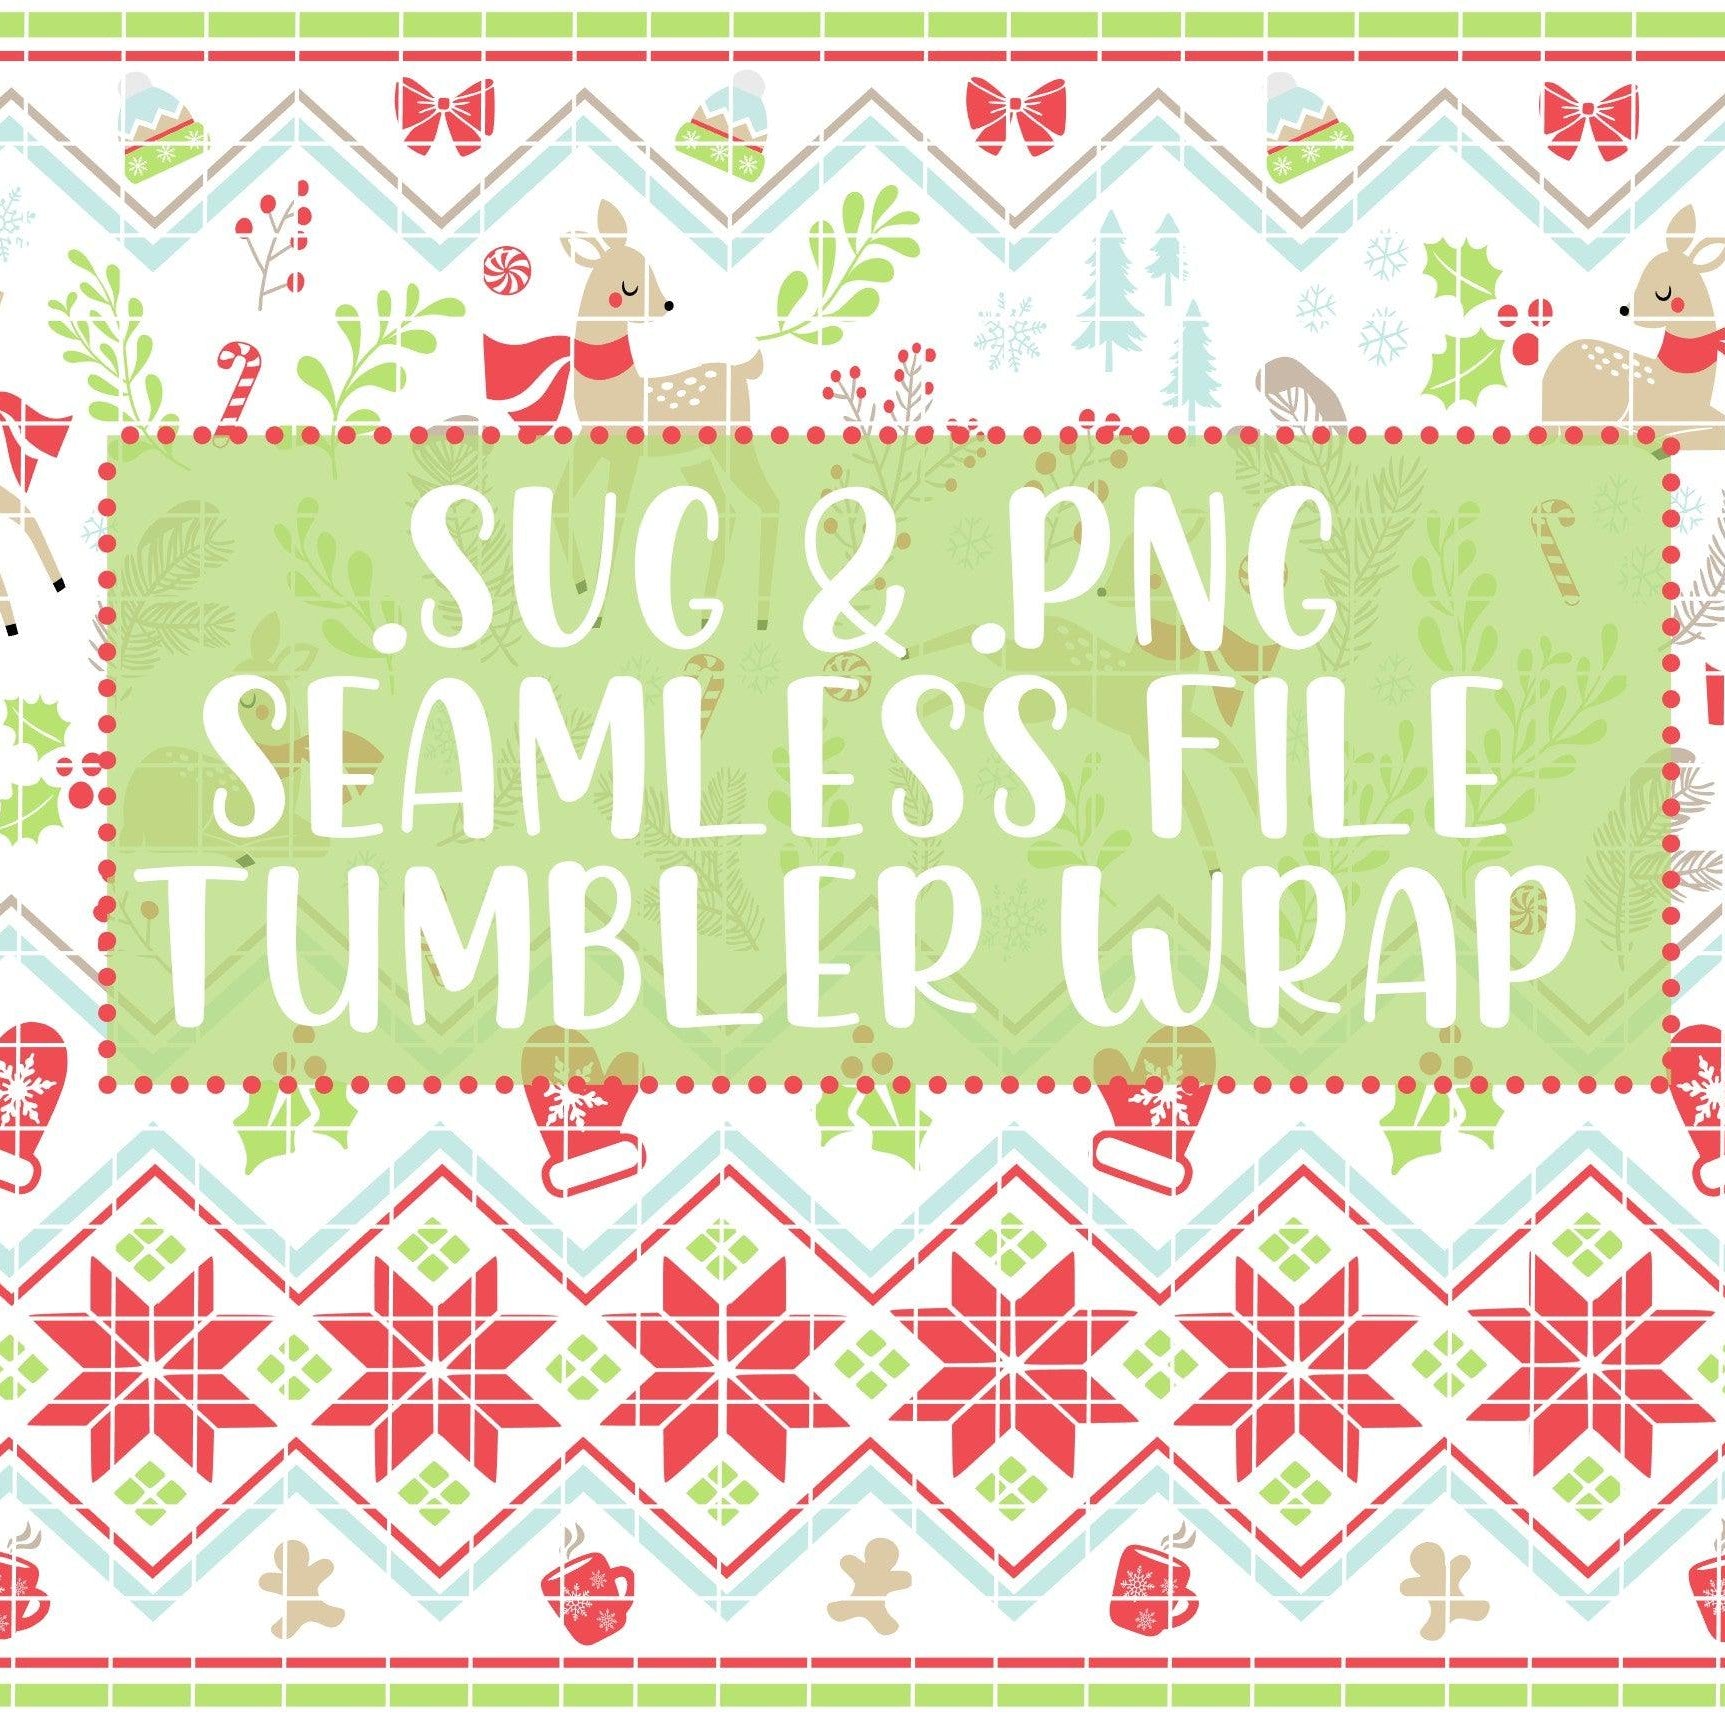 Fawn Fair Isle Sweater Pattern Digital Download .SVG & .PNG Format - Happyfox Supply Co